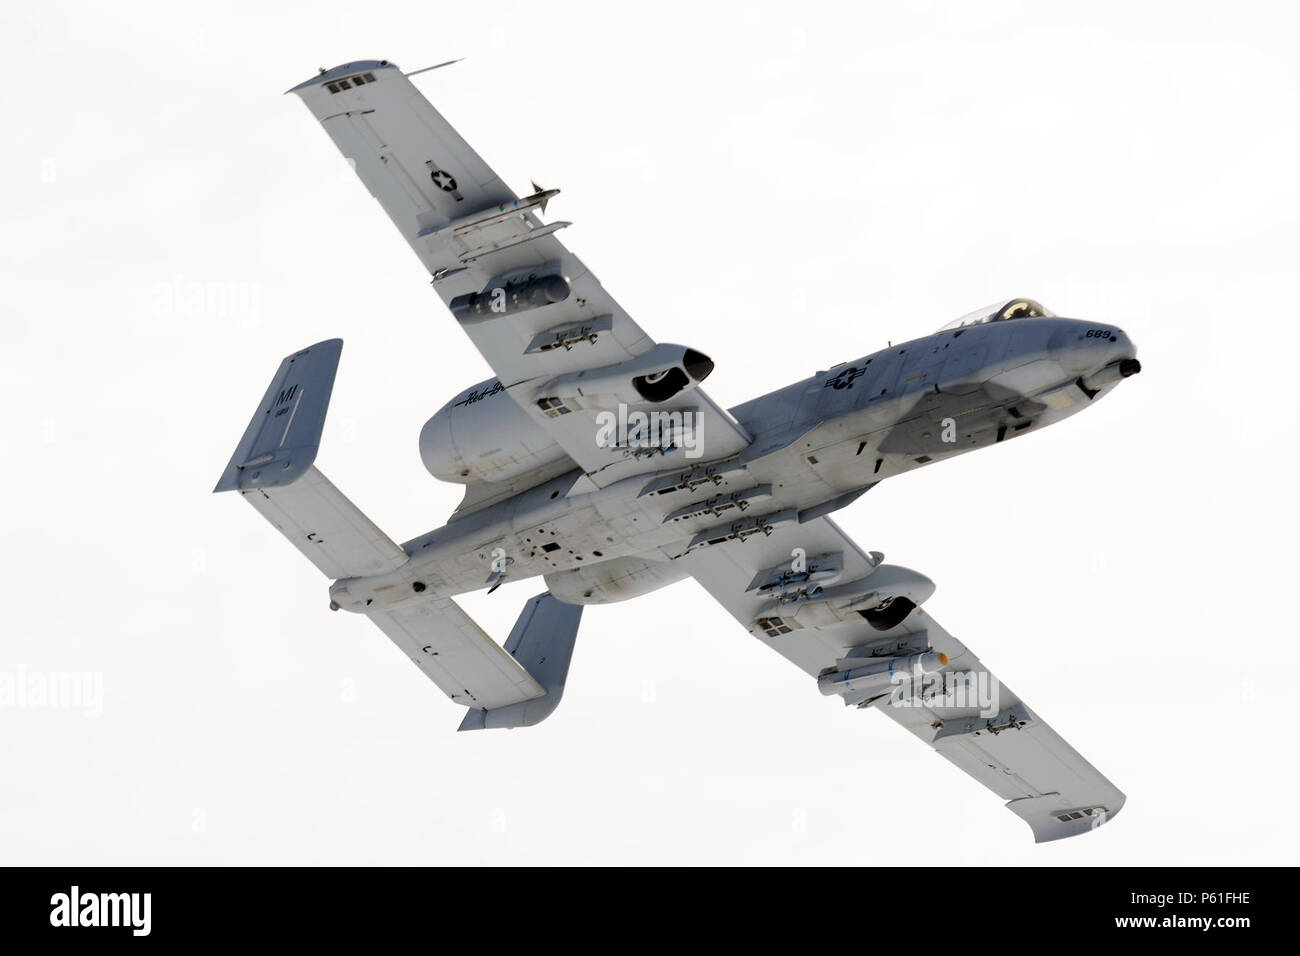 An A-10 Thunderbolt II engages in a training mission at the Grayling Aerial Gunnery Range near Waters, Mich., April 7, 2016. The A-10 is operated by the 107th Fighter Squadron of the Michigan Air National Guard and are based at Selfridge Air National Guard Base, Mich. (U.S. Air National Guard photo by Master Sgt. David Kujawa) Stock Photo